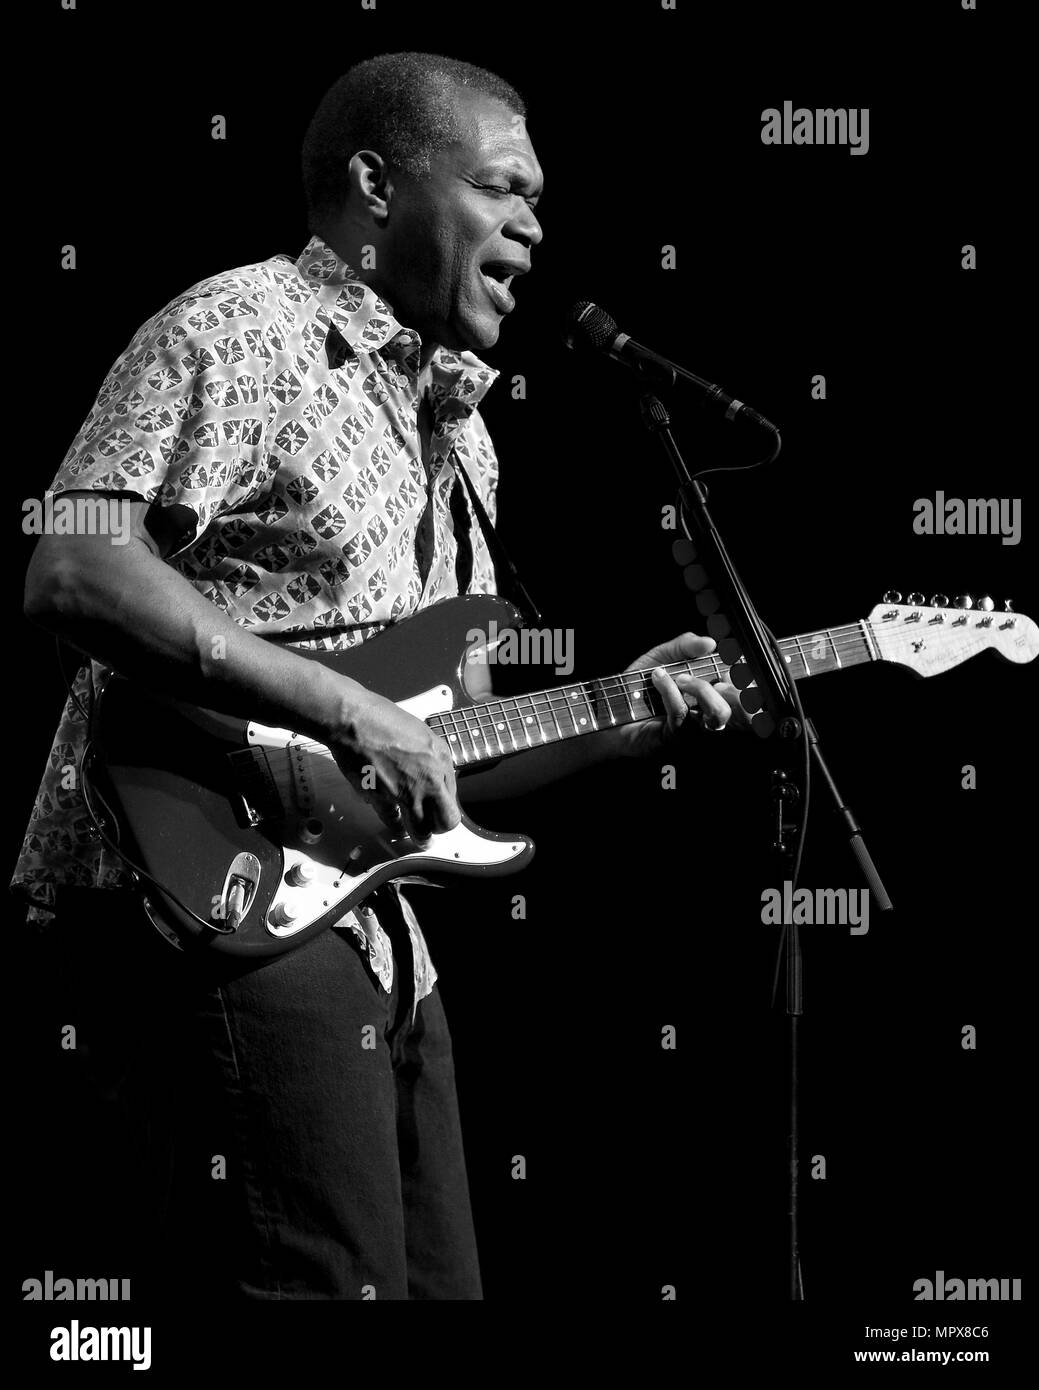 Robert cray Black and White Stock Photos & Images - Alamy